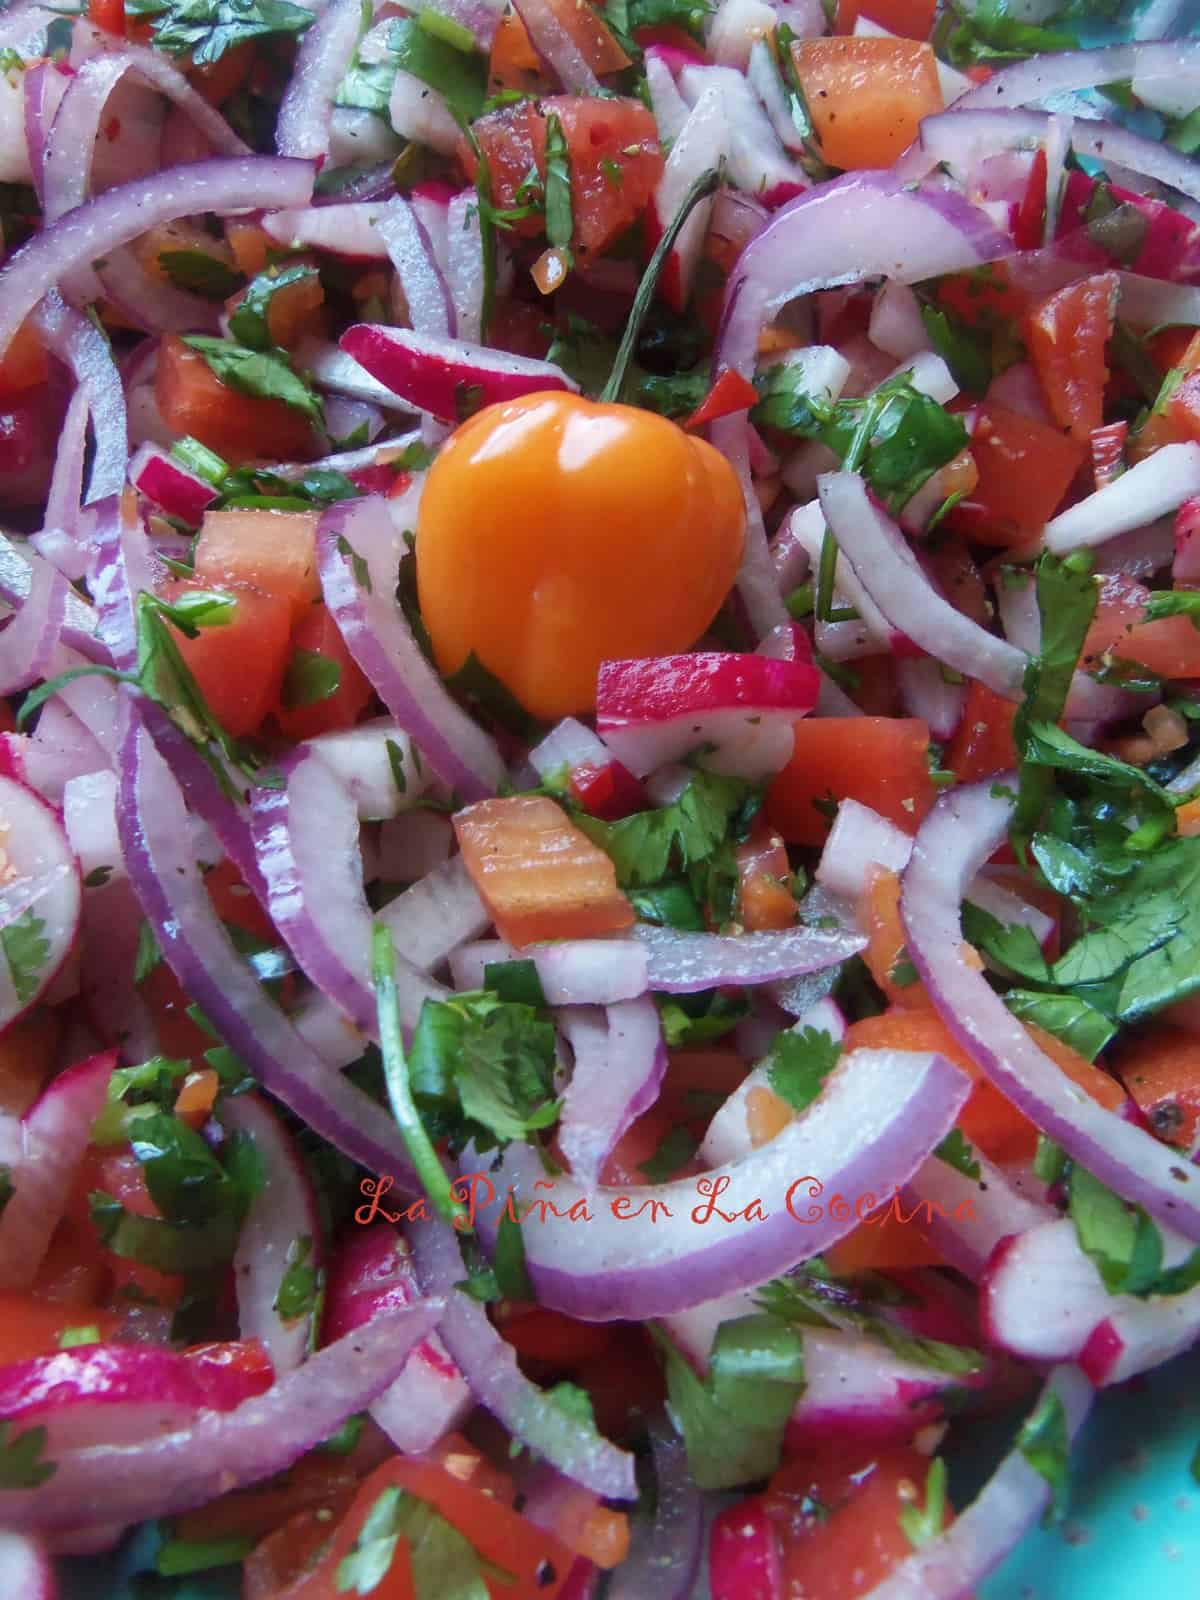 Chimol~ El Salvador. A fresh chopped salsa almost exactly as Pico de Gallo from Mexico, but with added radishes. In El Salvador, they would most likely not add the spicy chiles.